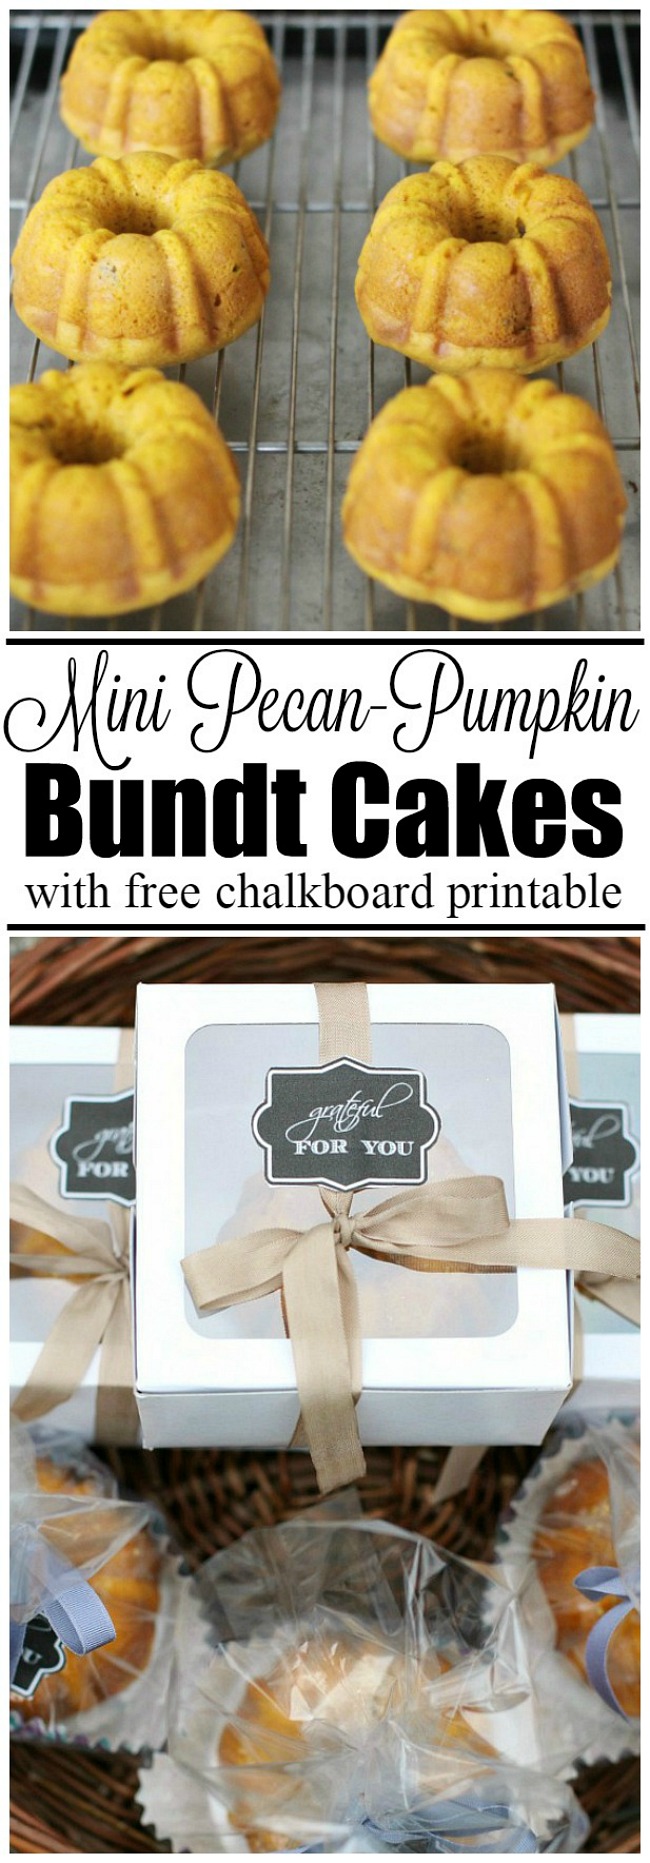 Mini pecan pumpkin bundt cakes packaged up in individual boxes with a free printable chalkboard label.